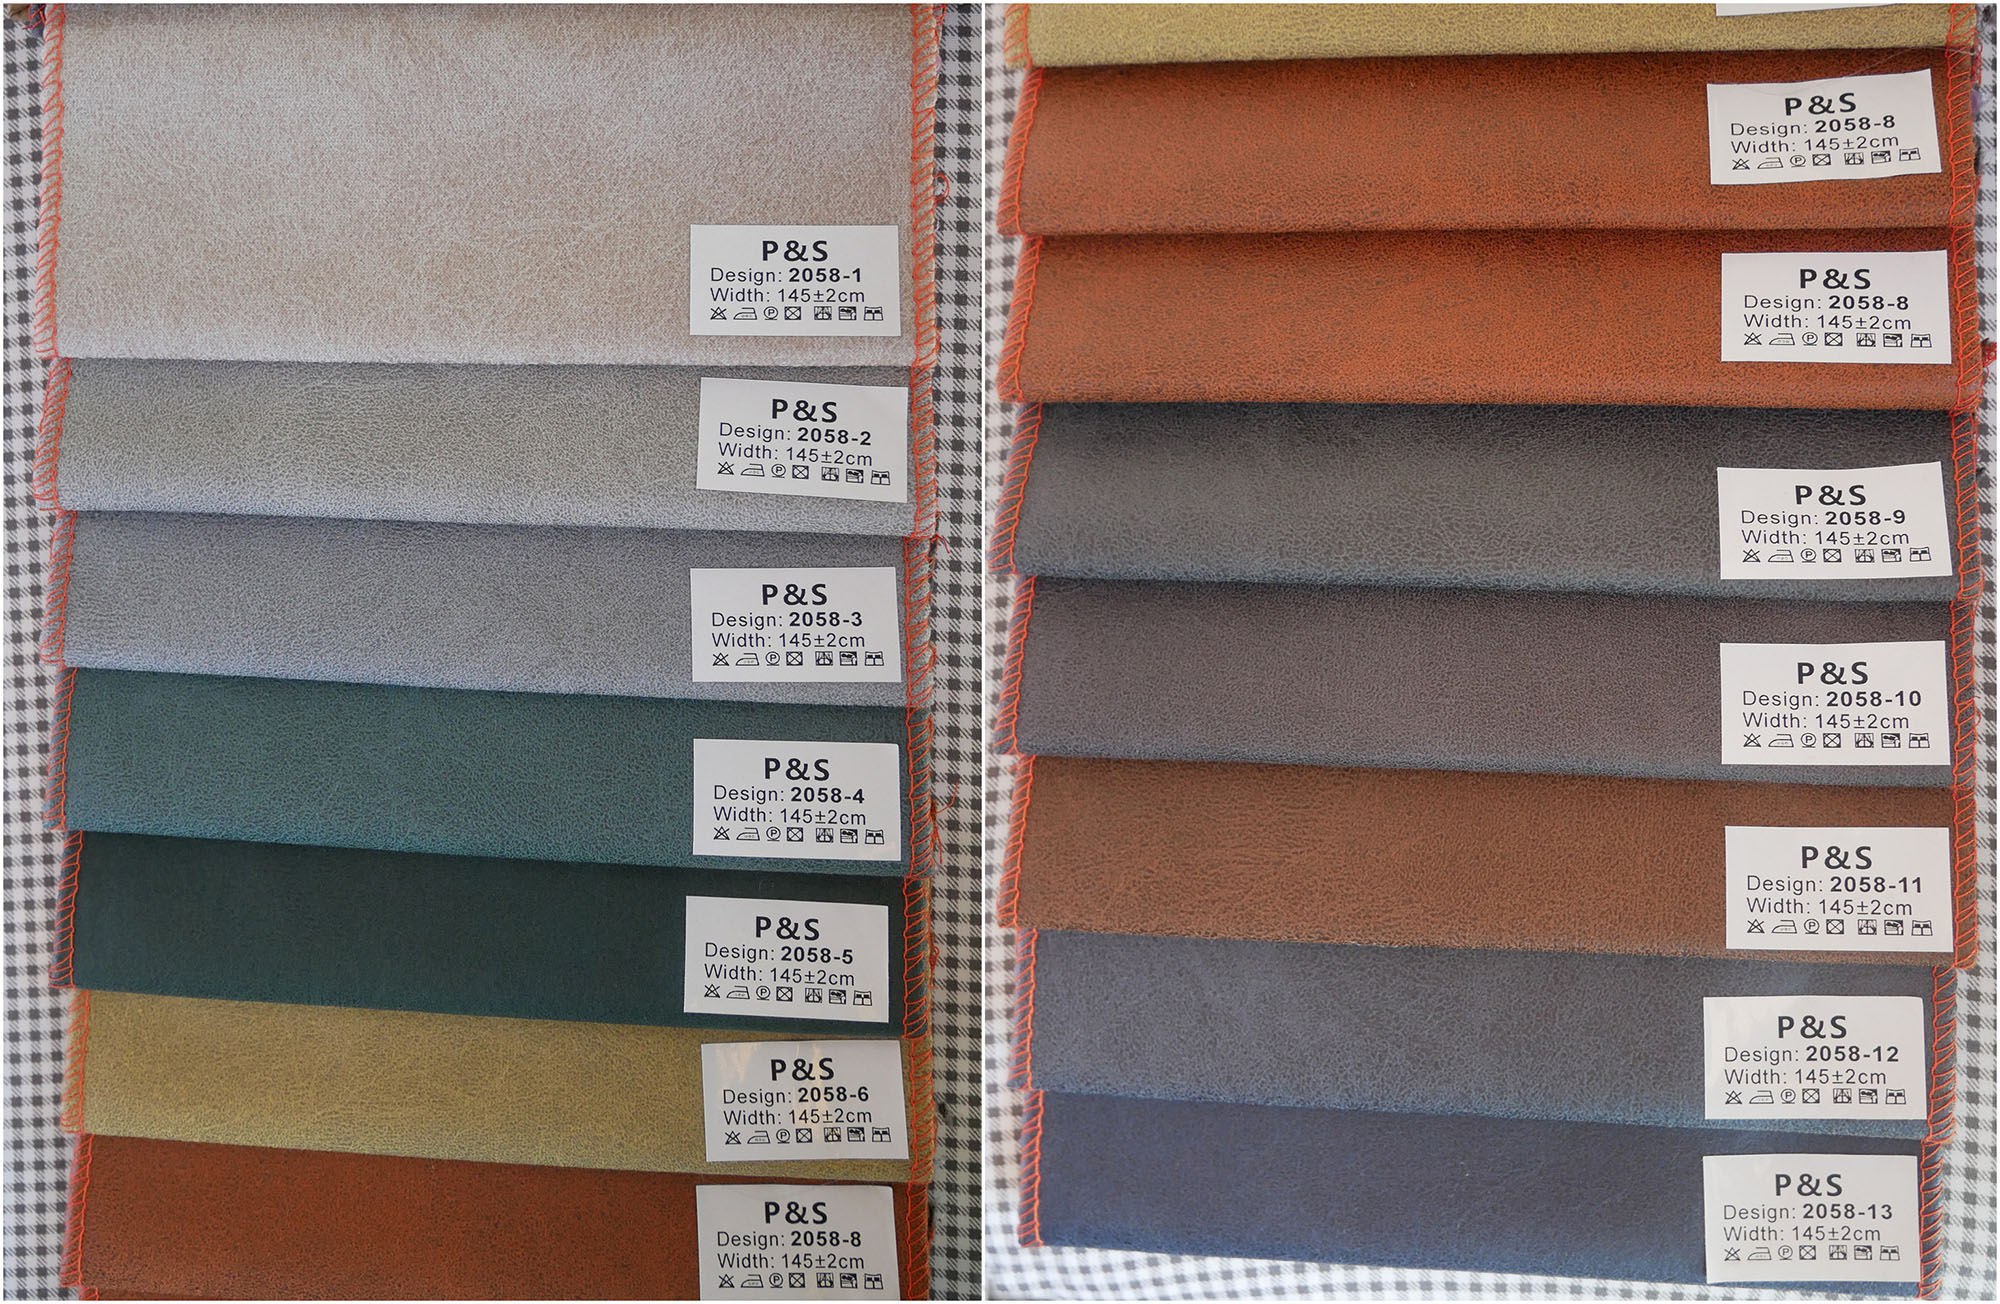 Waterproof Technical Leather Fabric Color Chart